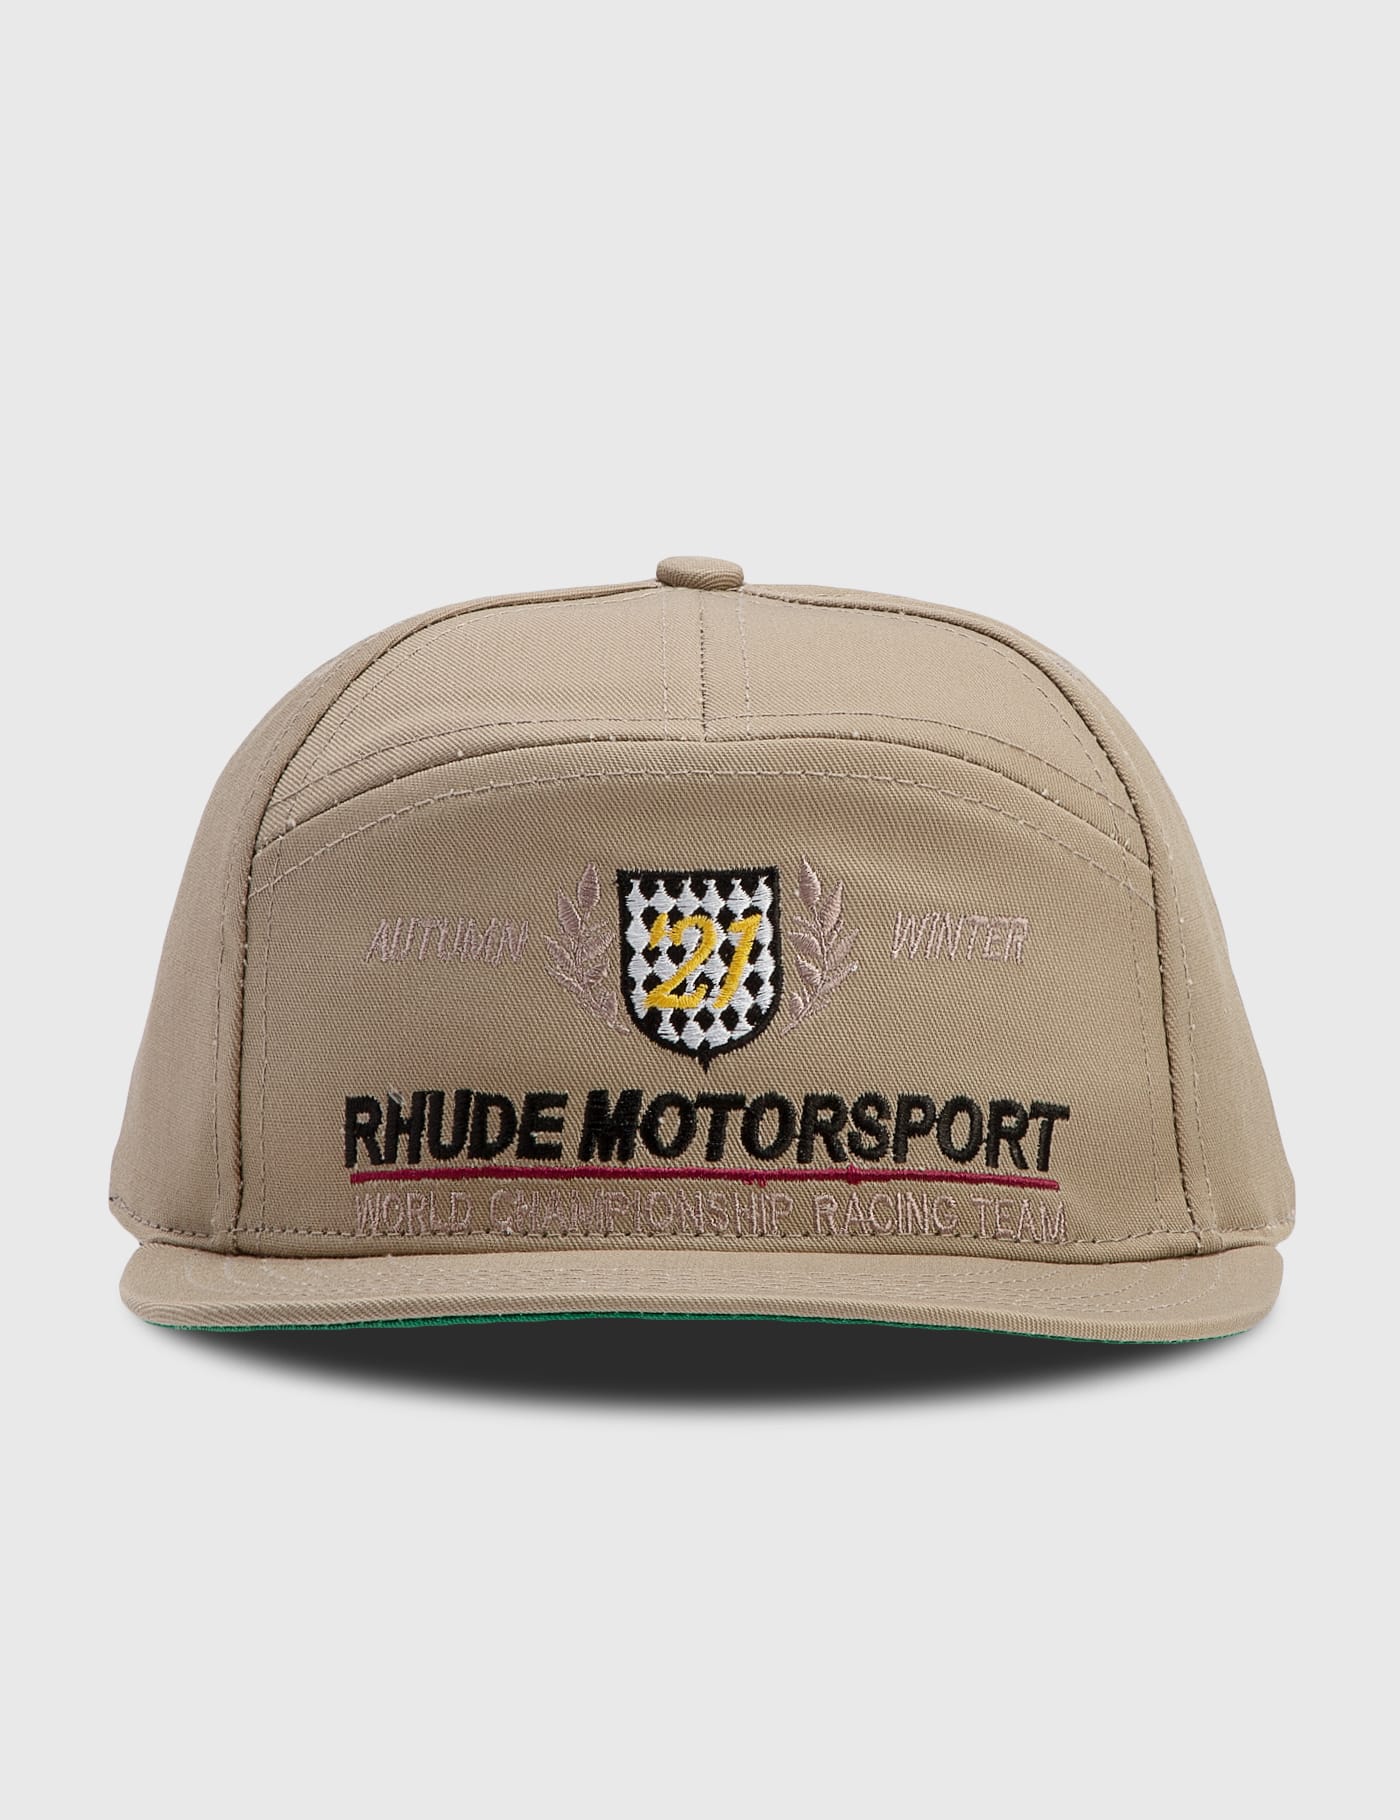 Rhude - Motorsport Cap | HBX - Globally Curated Fashion and 